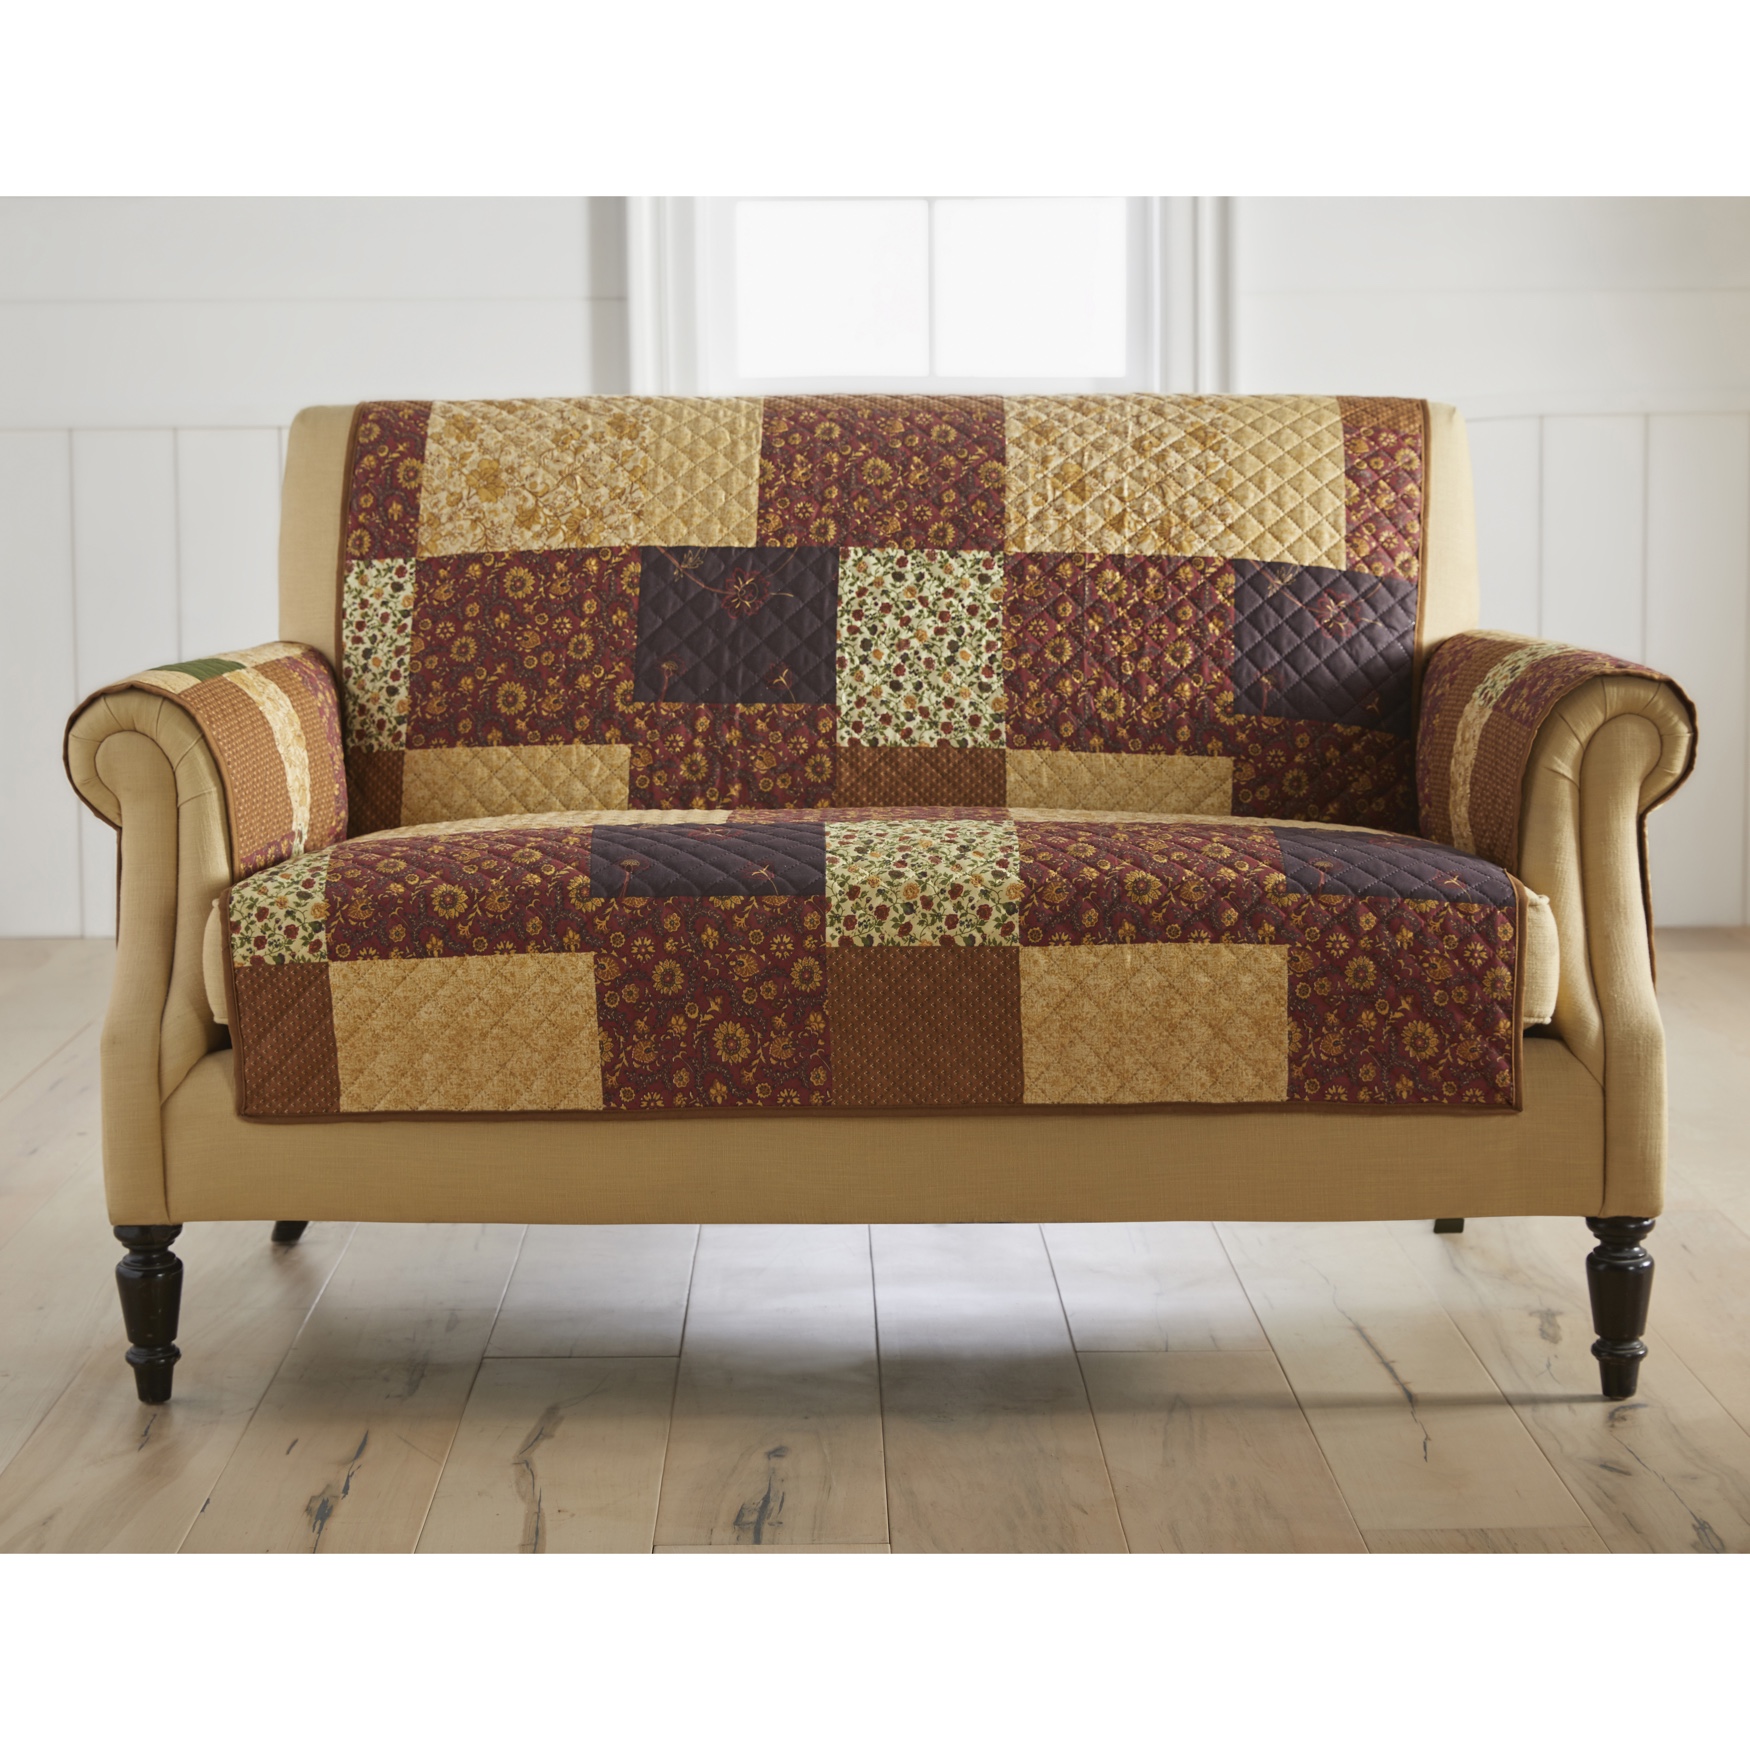 Printed Faux Patchwork Loveseat Protector, BROWN GOLD